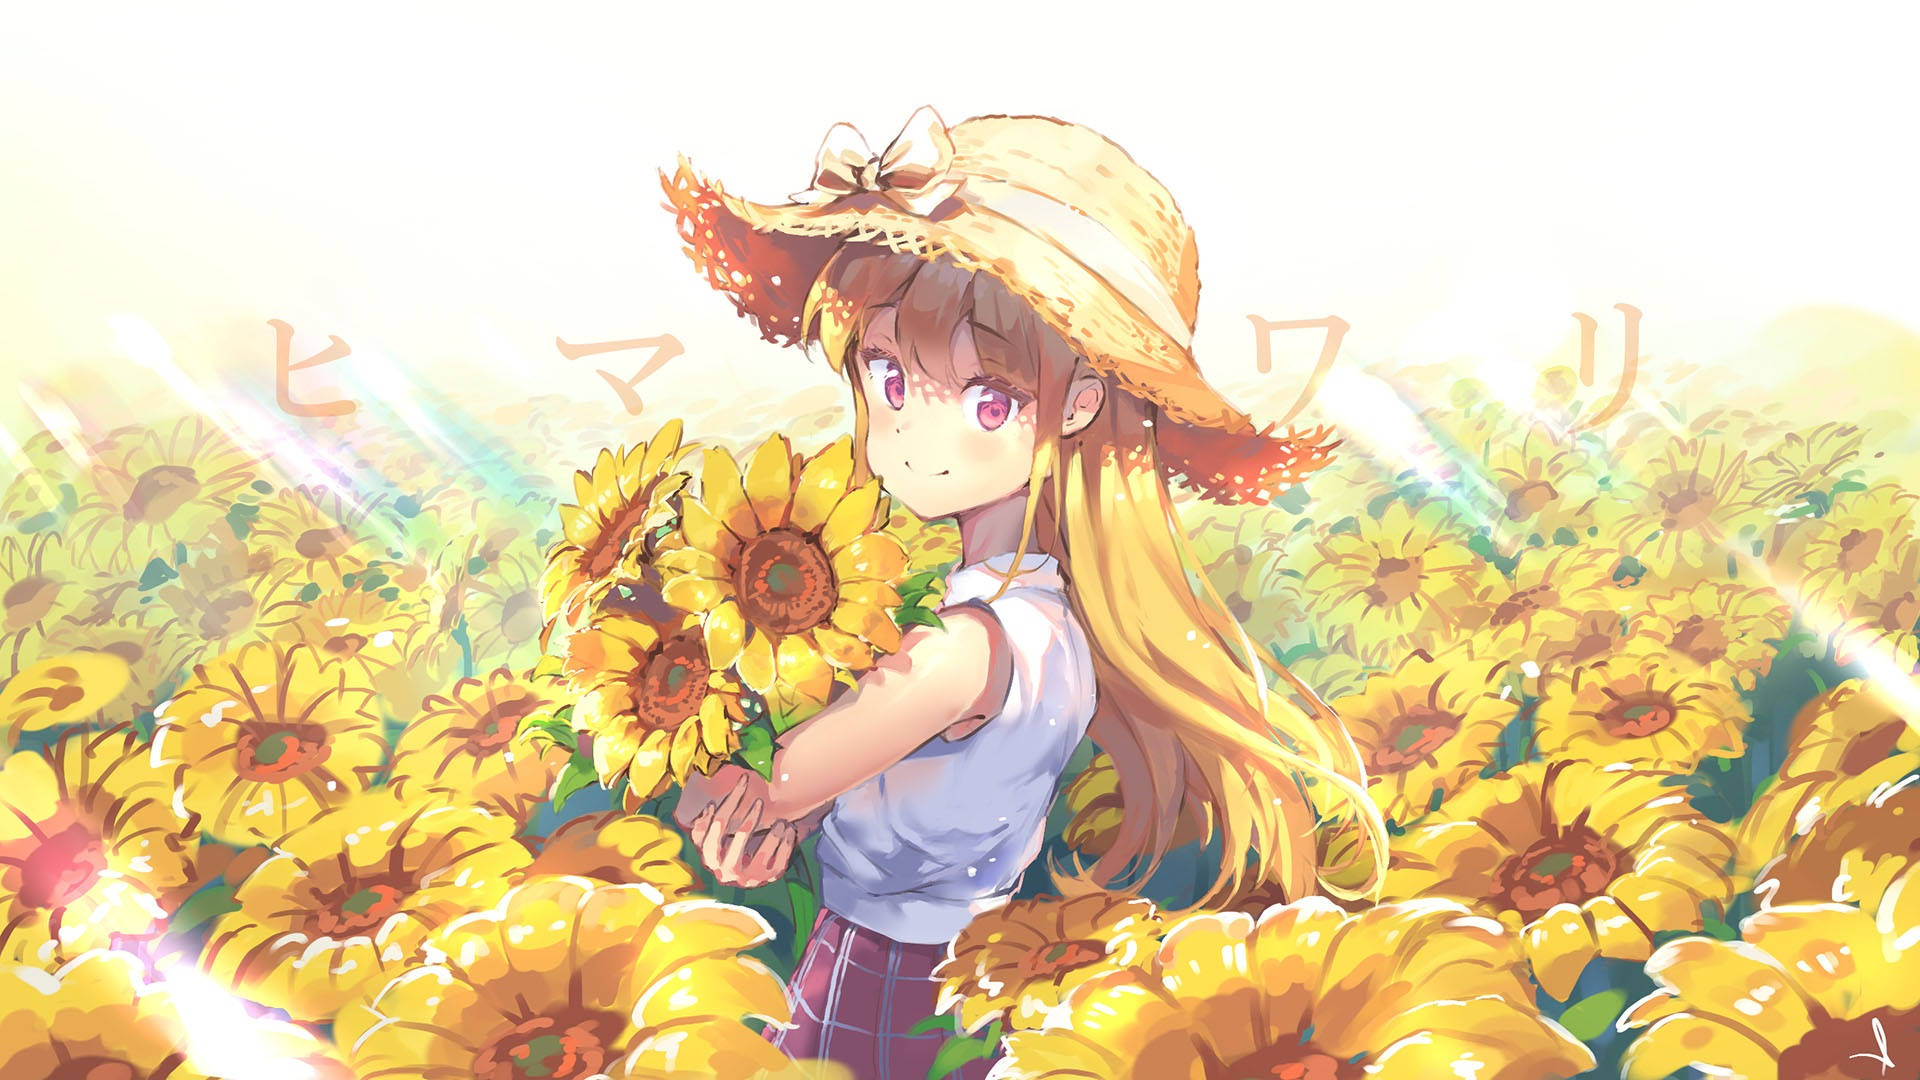 Cute Anime Characters With Sunflowers Background